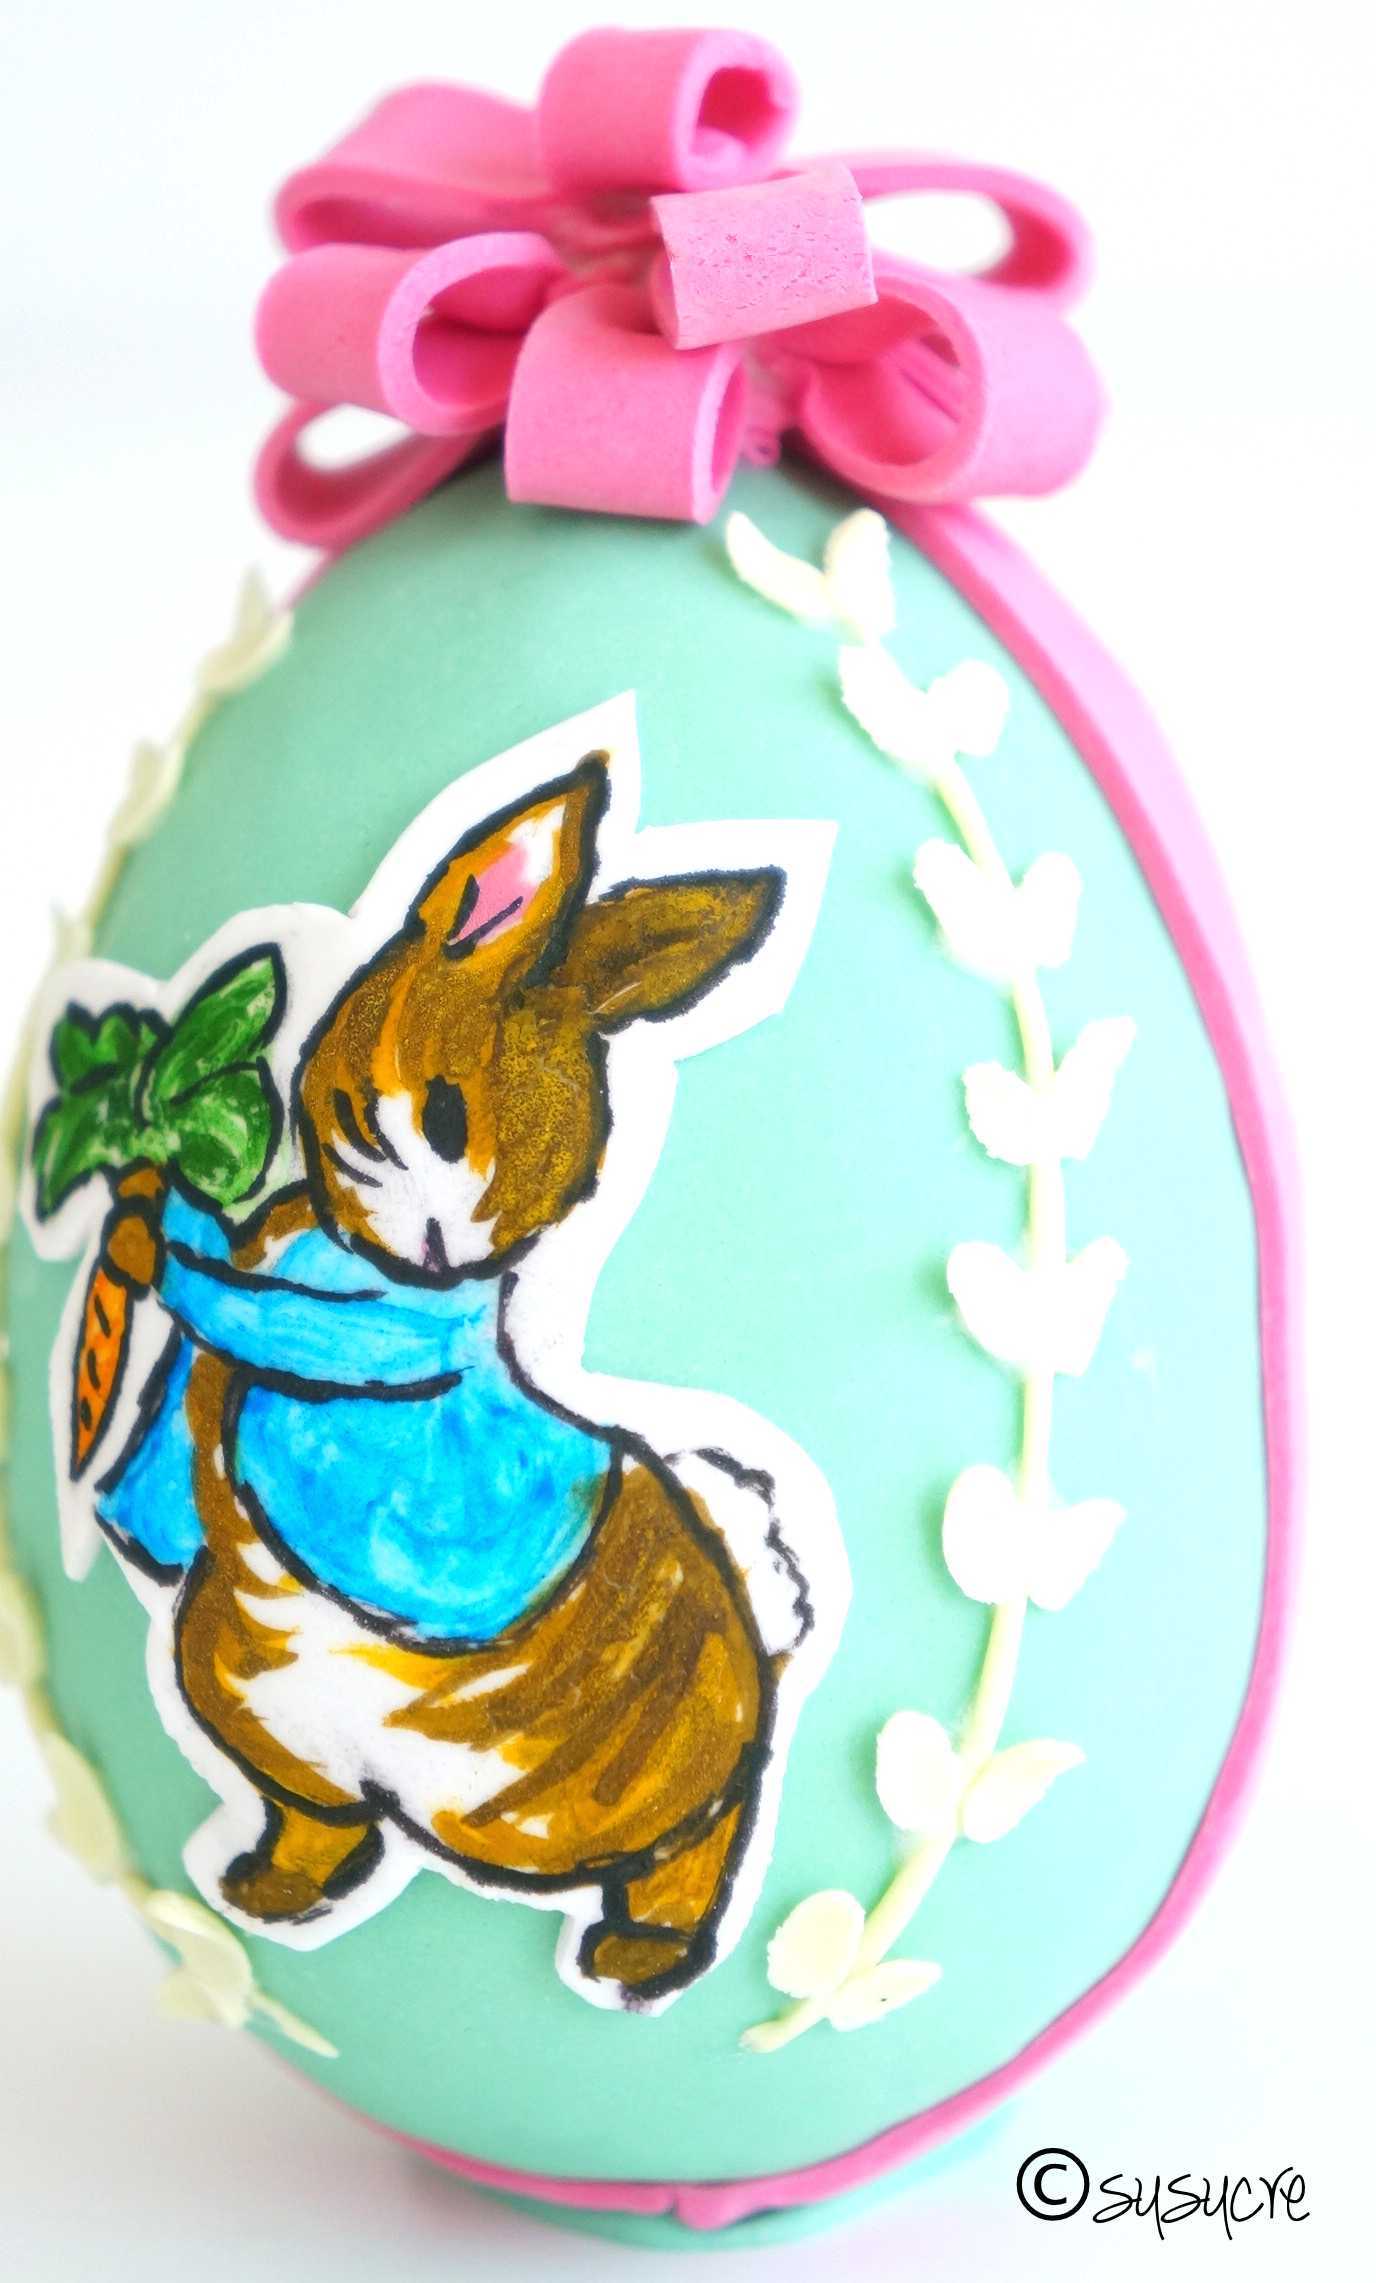 Easter Egg Cakes - Peter Rabbit with Carrot | susucre